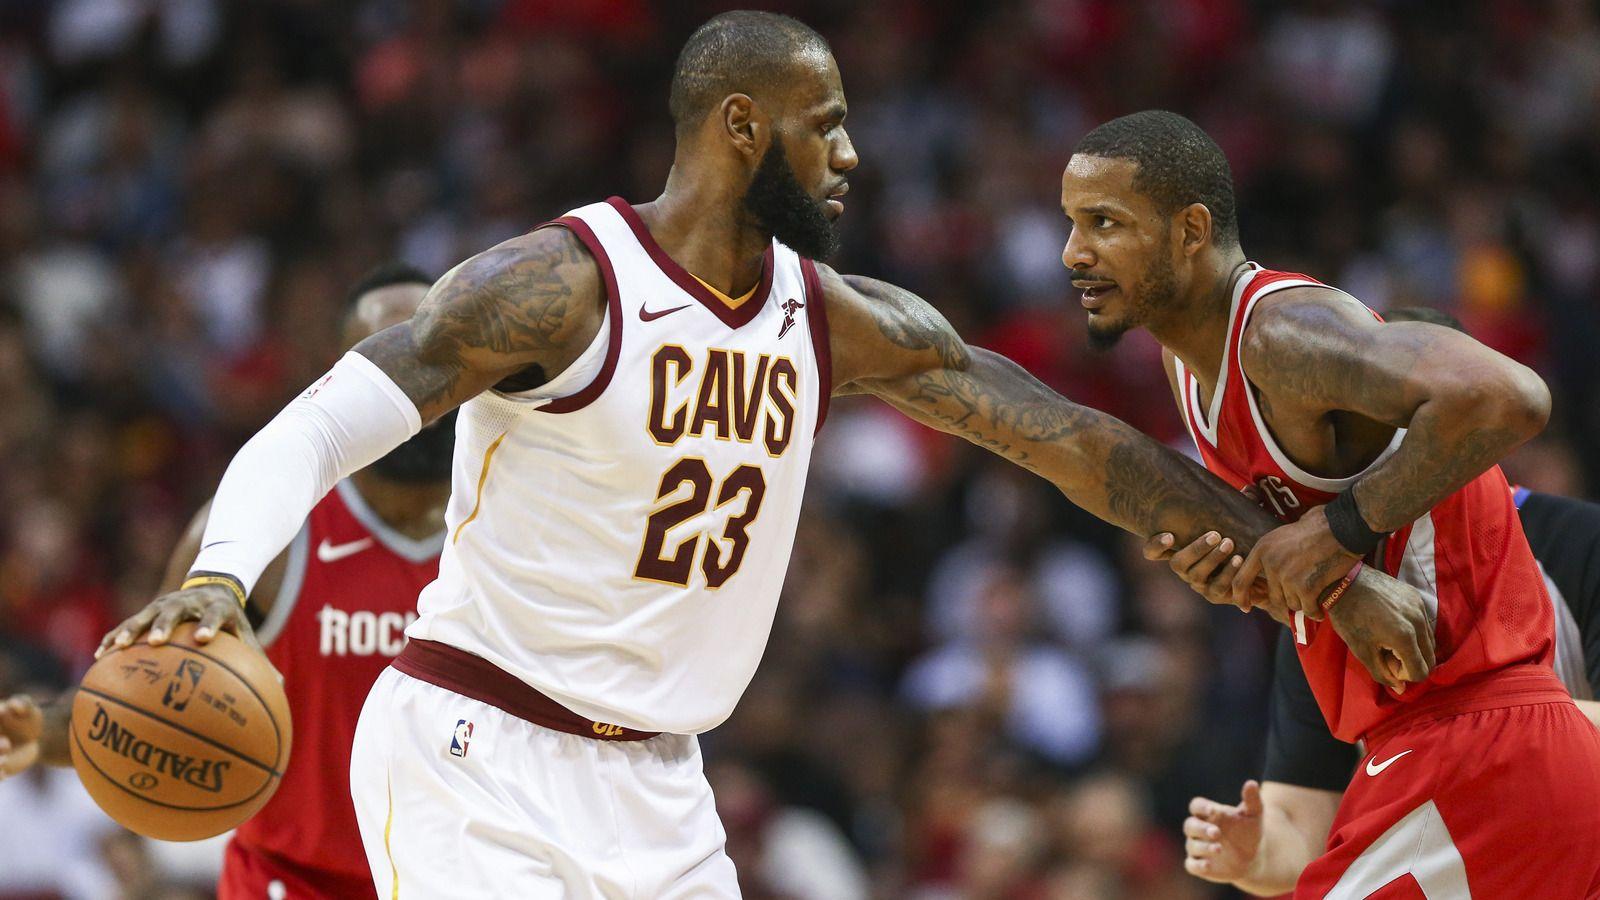 WATCH: LeBron James absolutely embarrasses Trevor Ariza